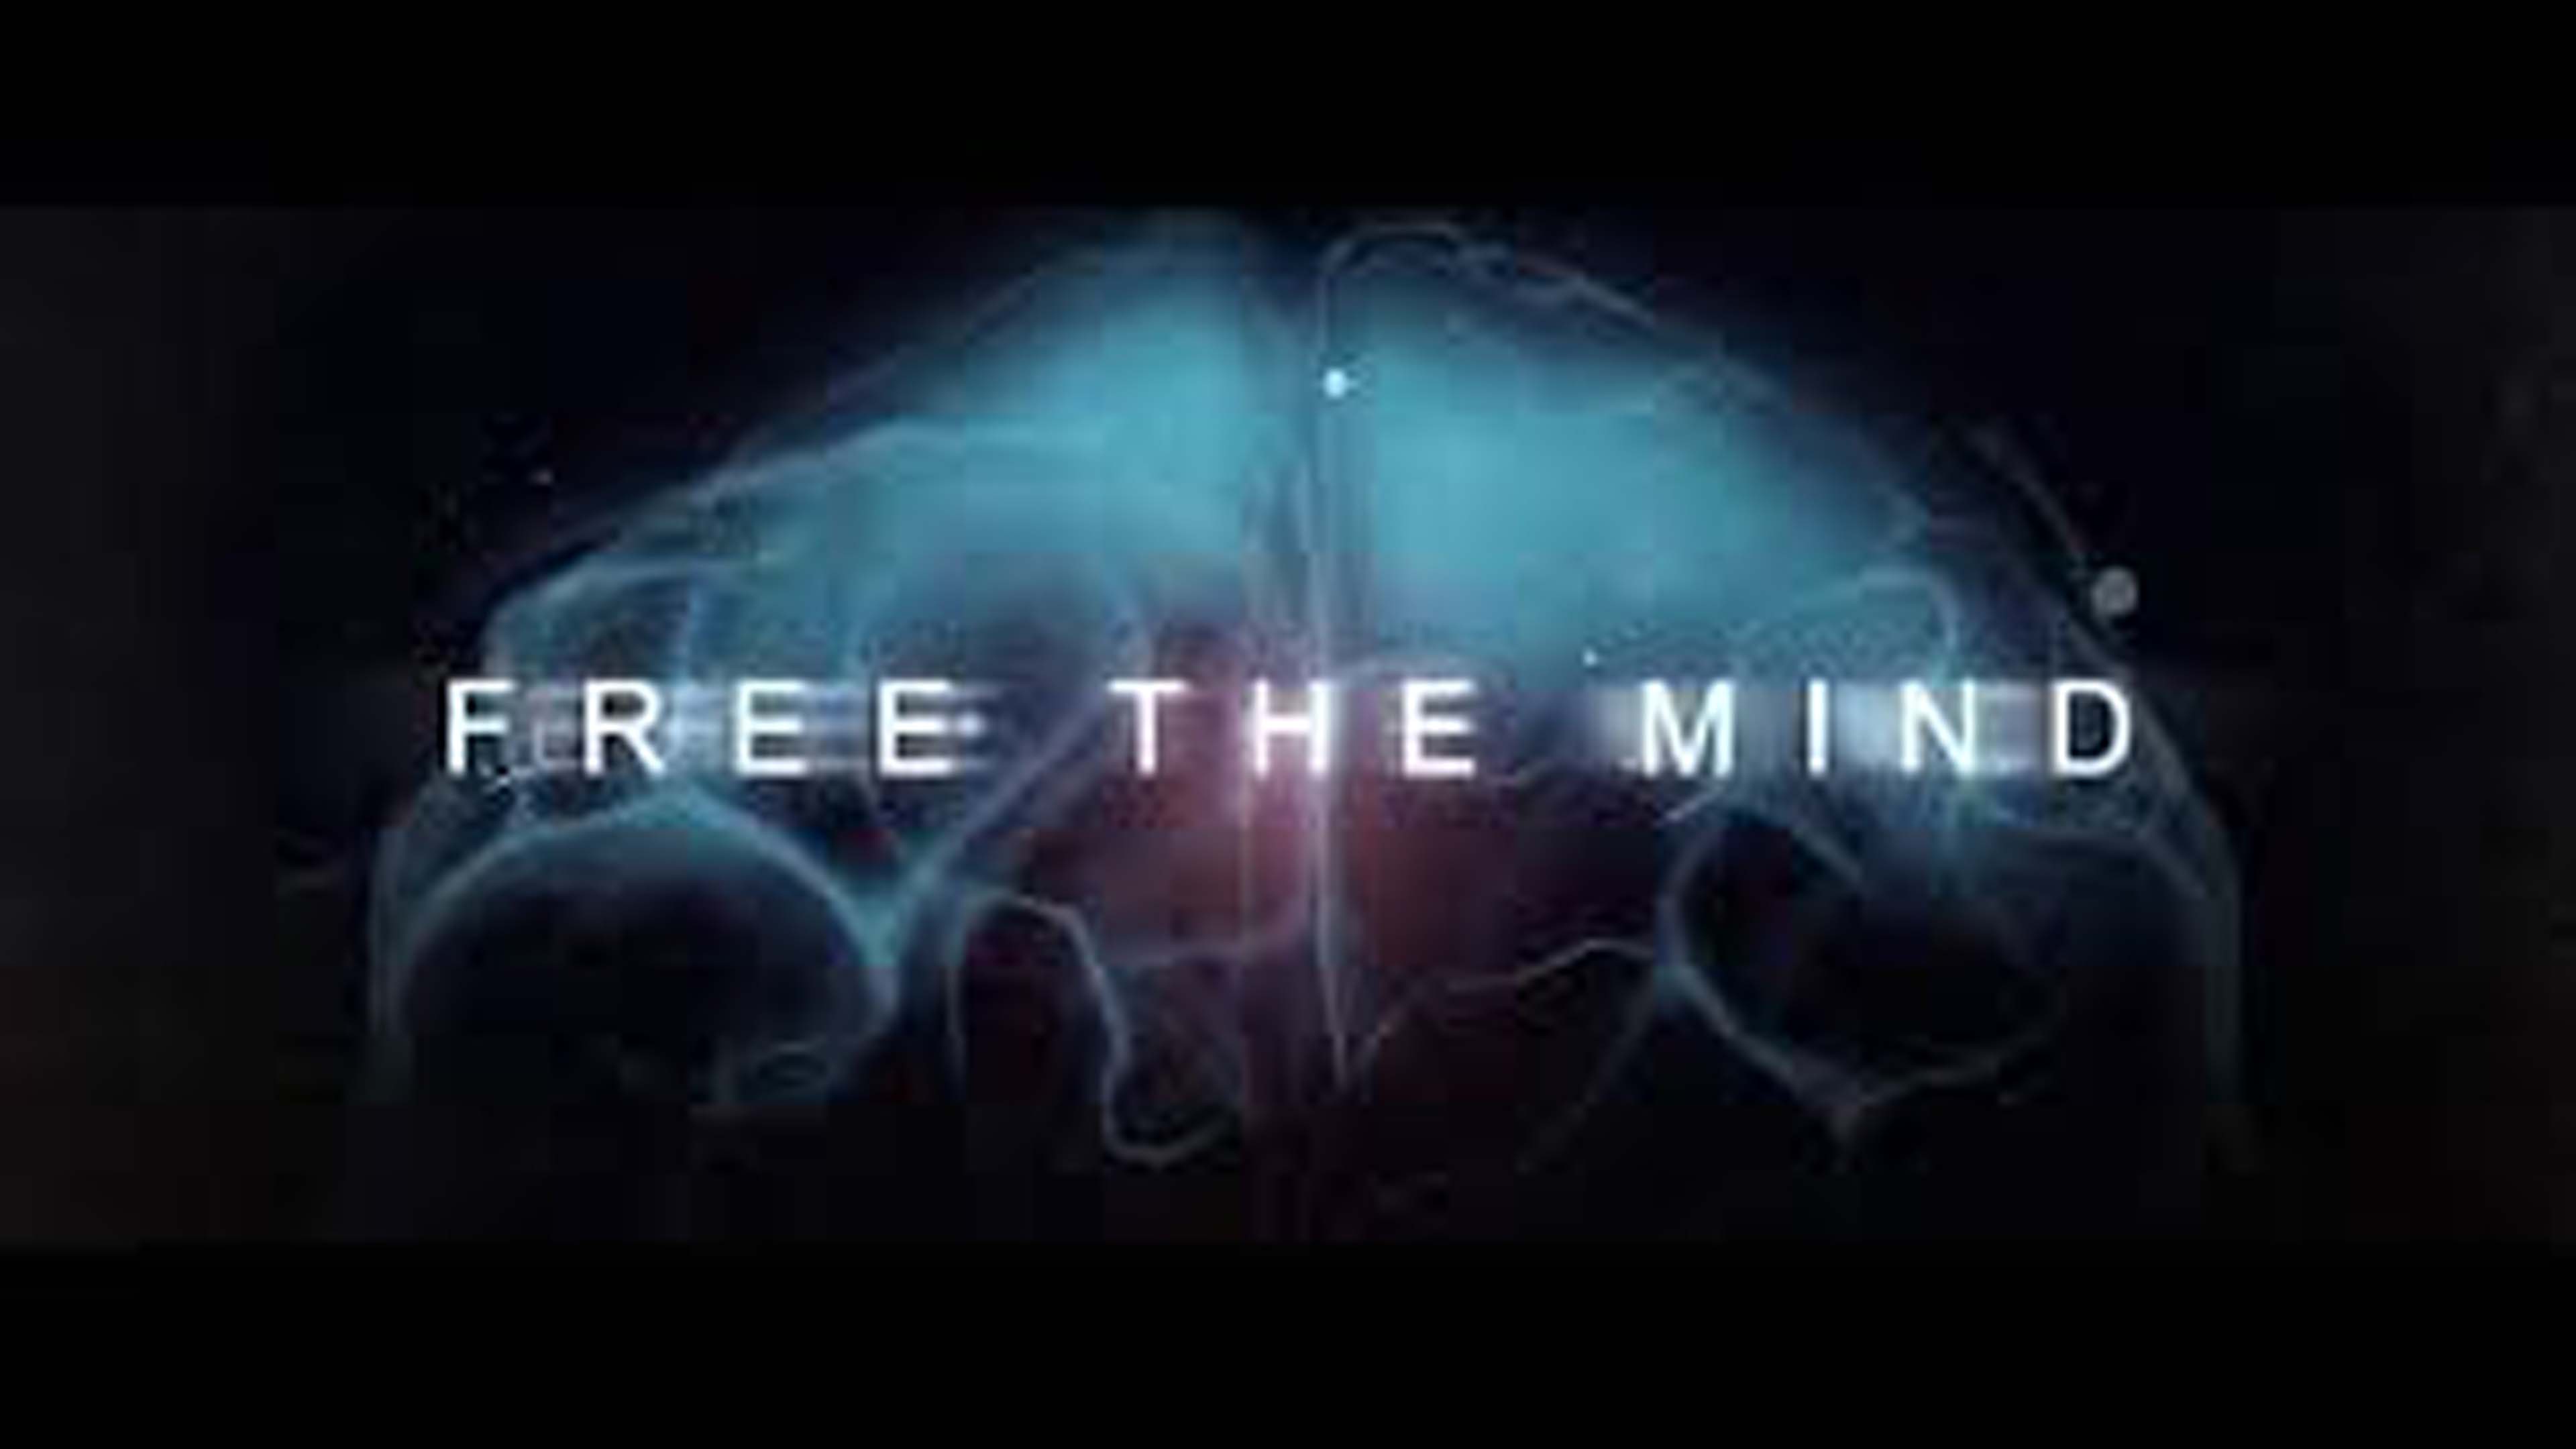 The Film "Free the Mind"